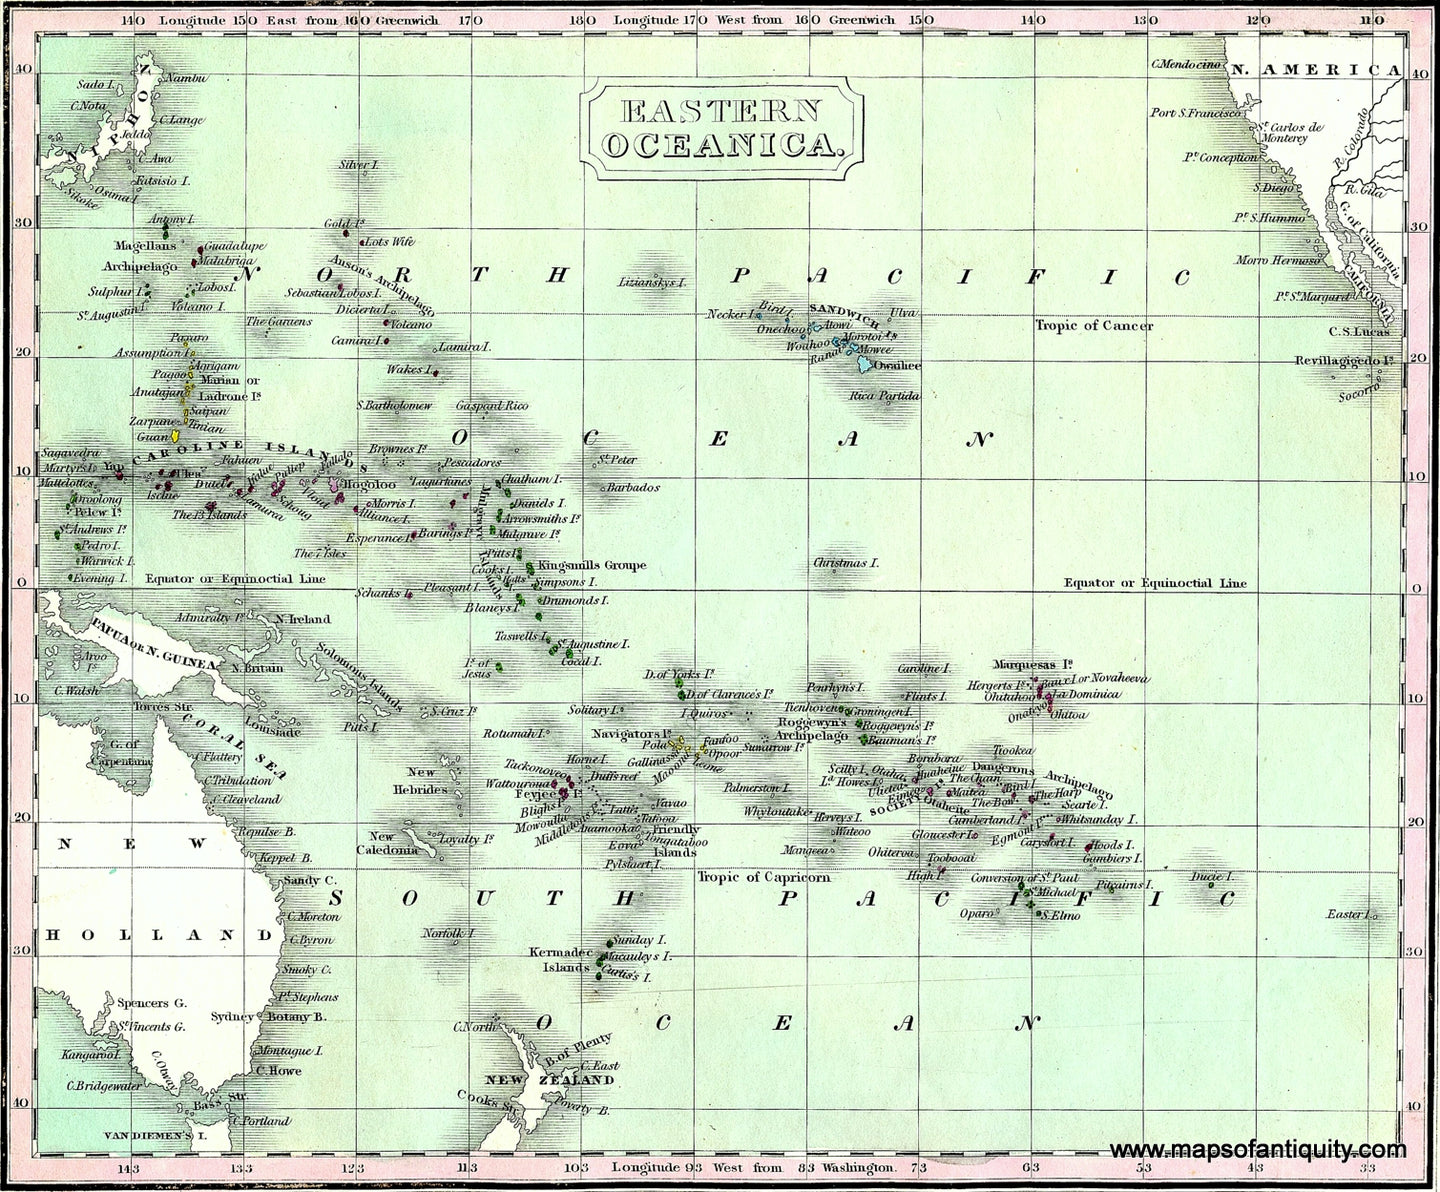 Antique-Hand-Colored-Map-Eastern-Oceanica.-Oceania--1828-Malte-Brun-Maps-Of-Antiquity